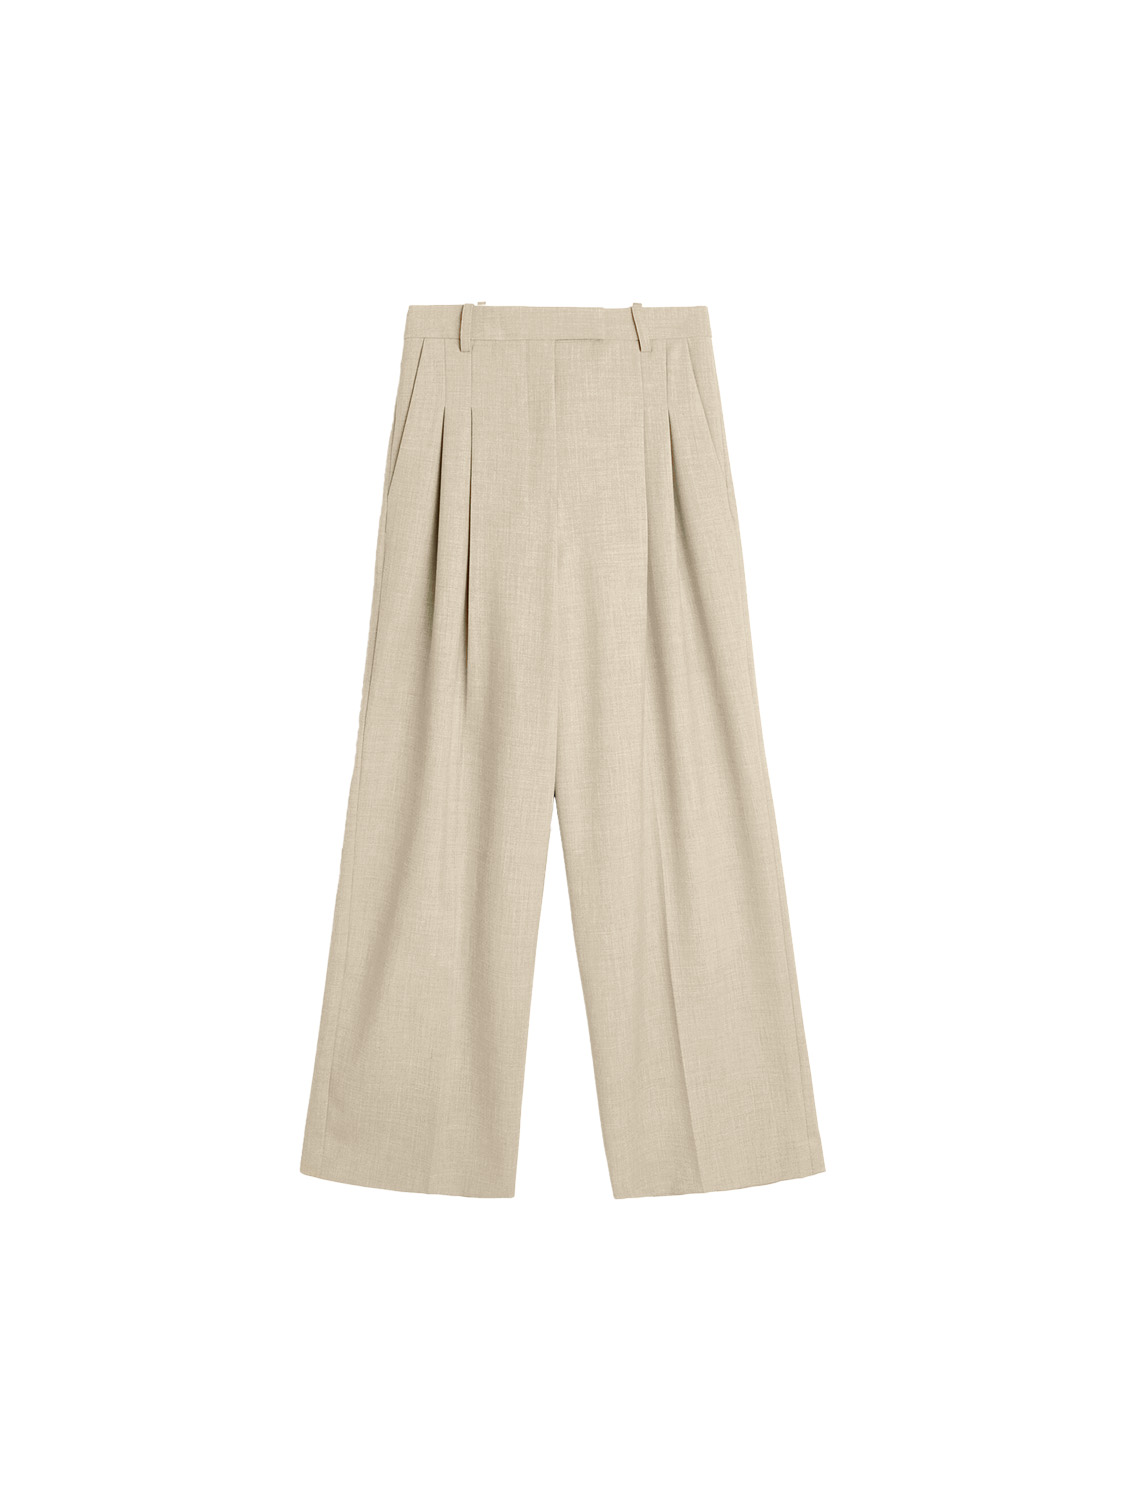 Cymbaria – wide-leg trousers made from a linen blend 